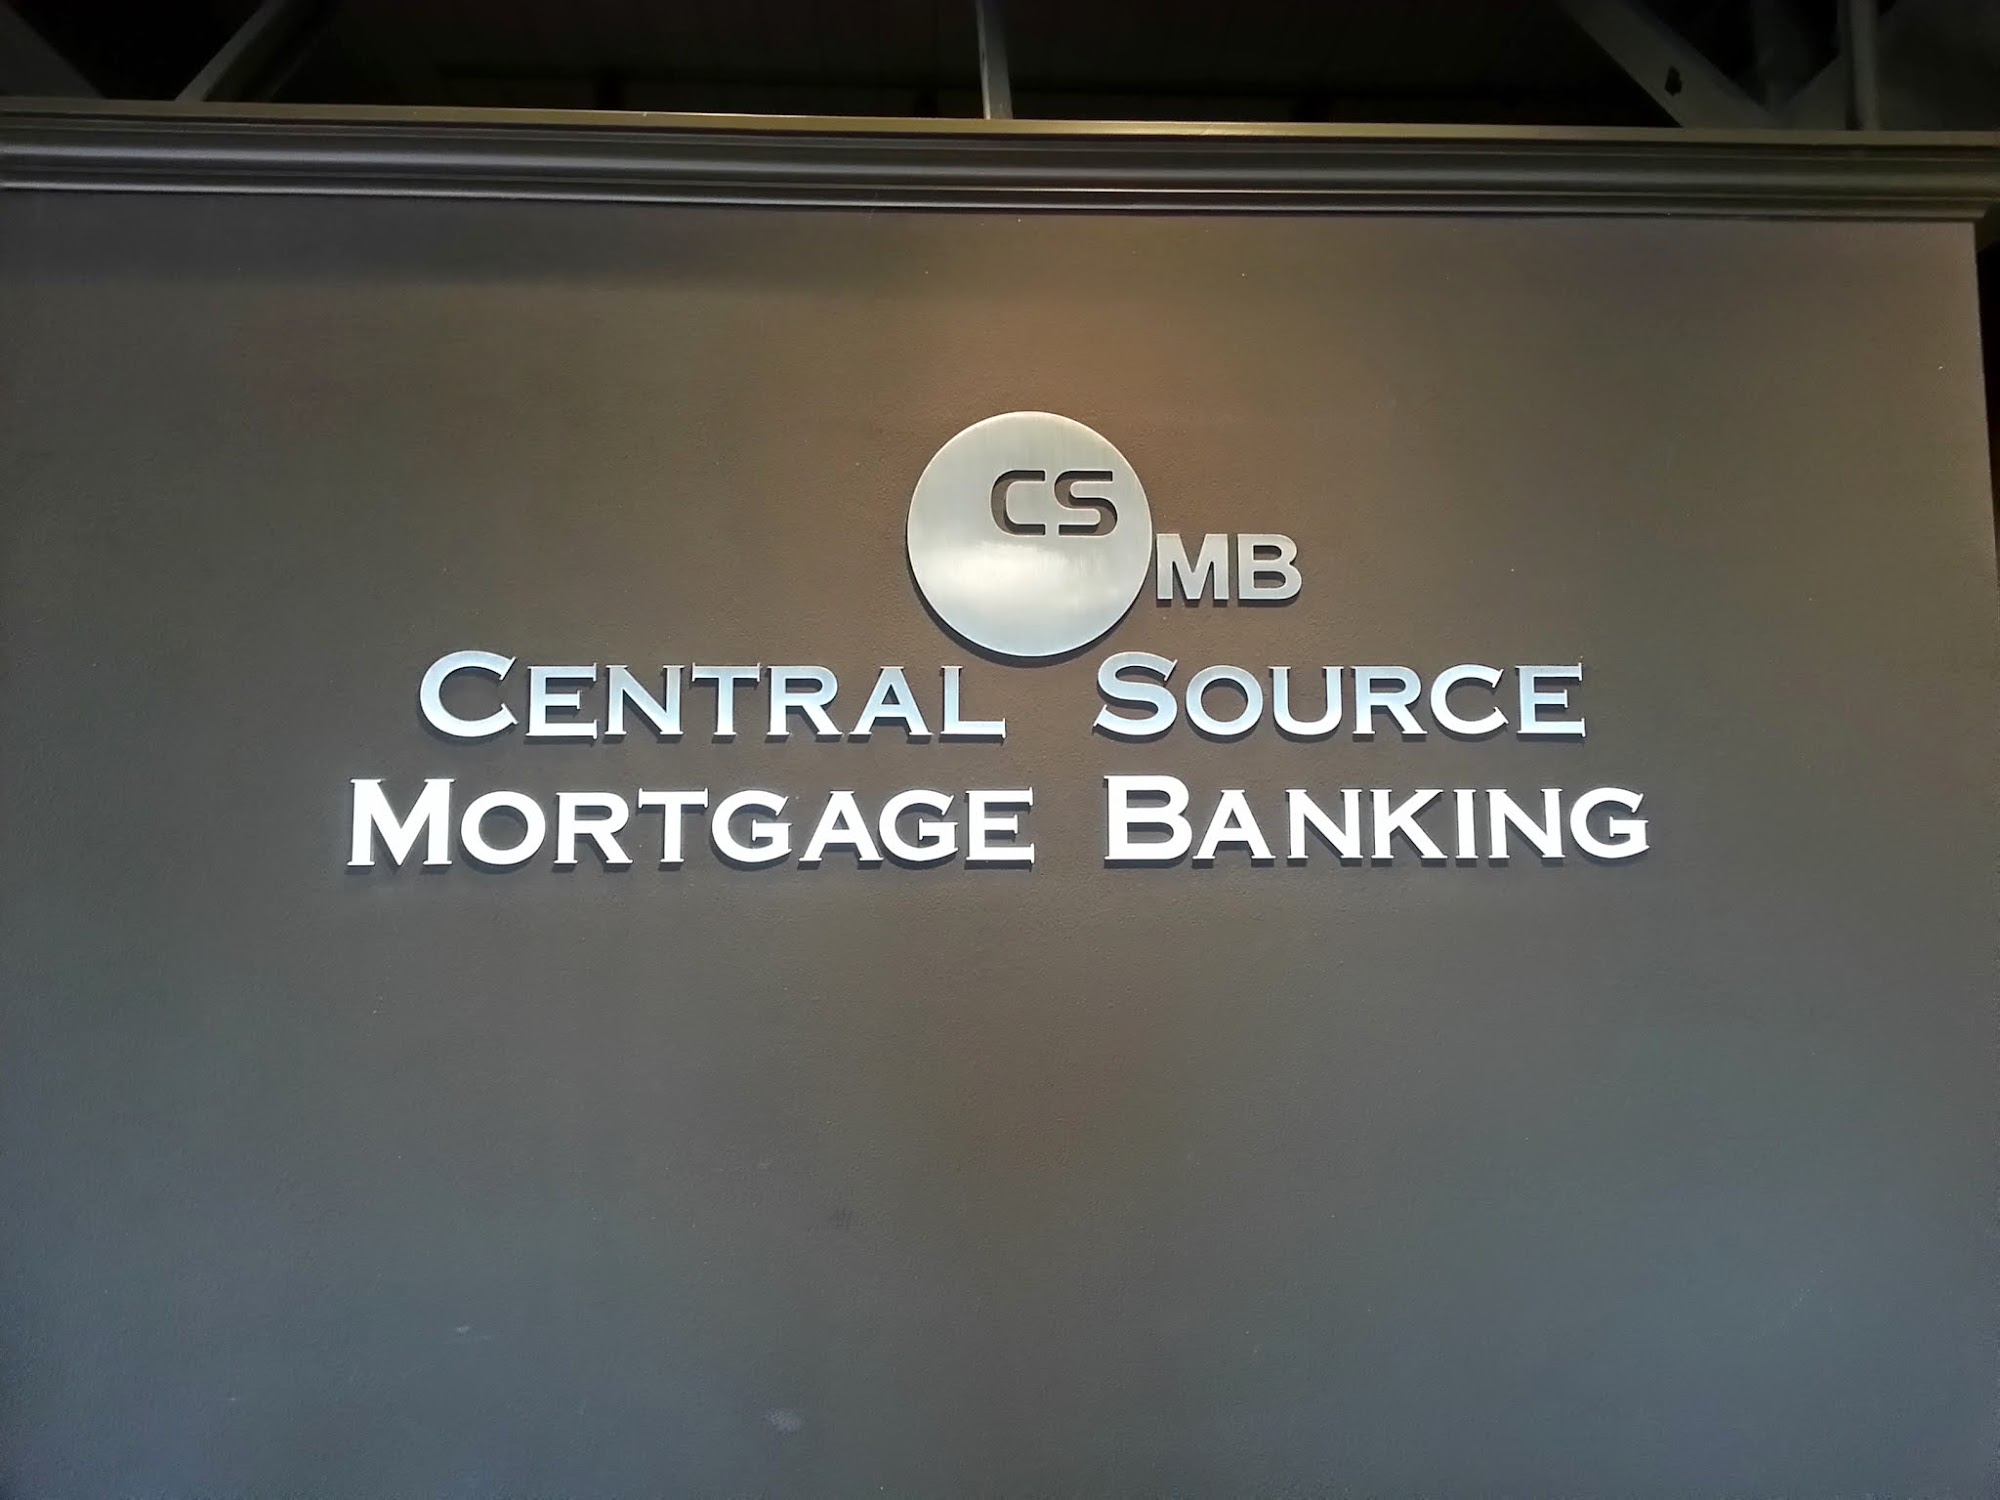 Central Source Mortgage Banking Inc